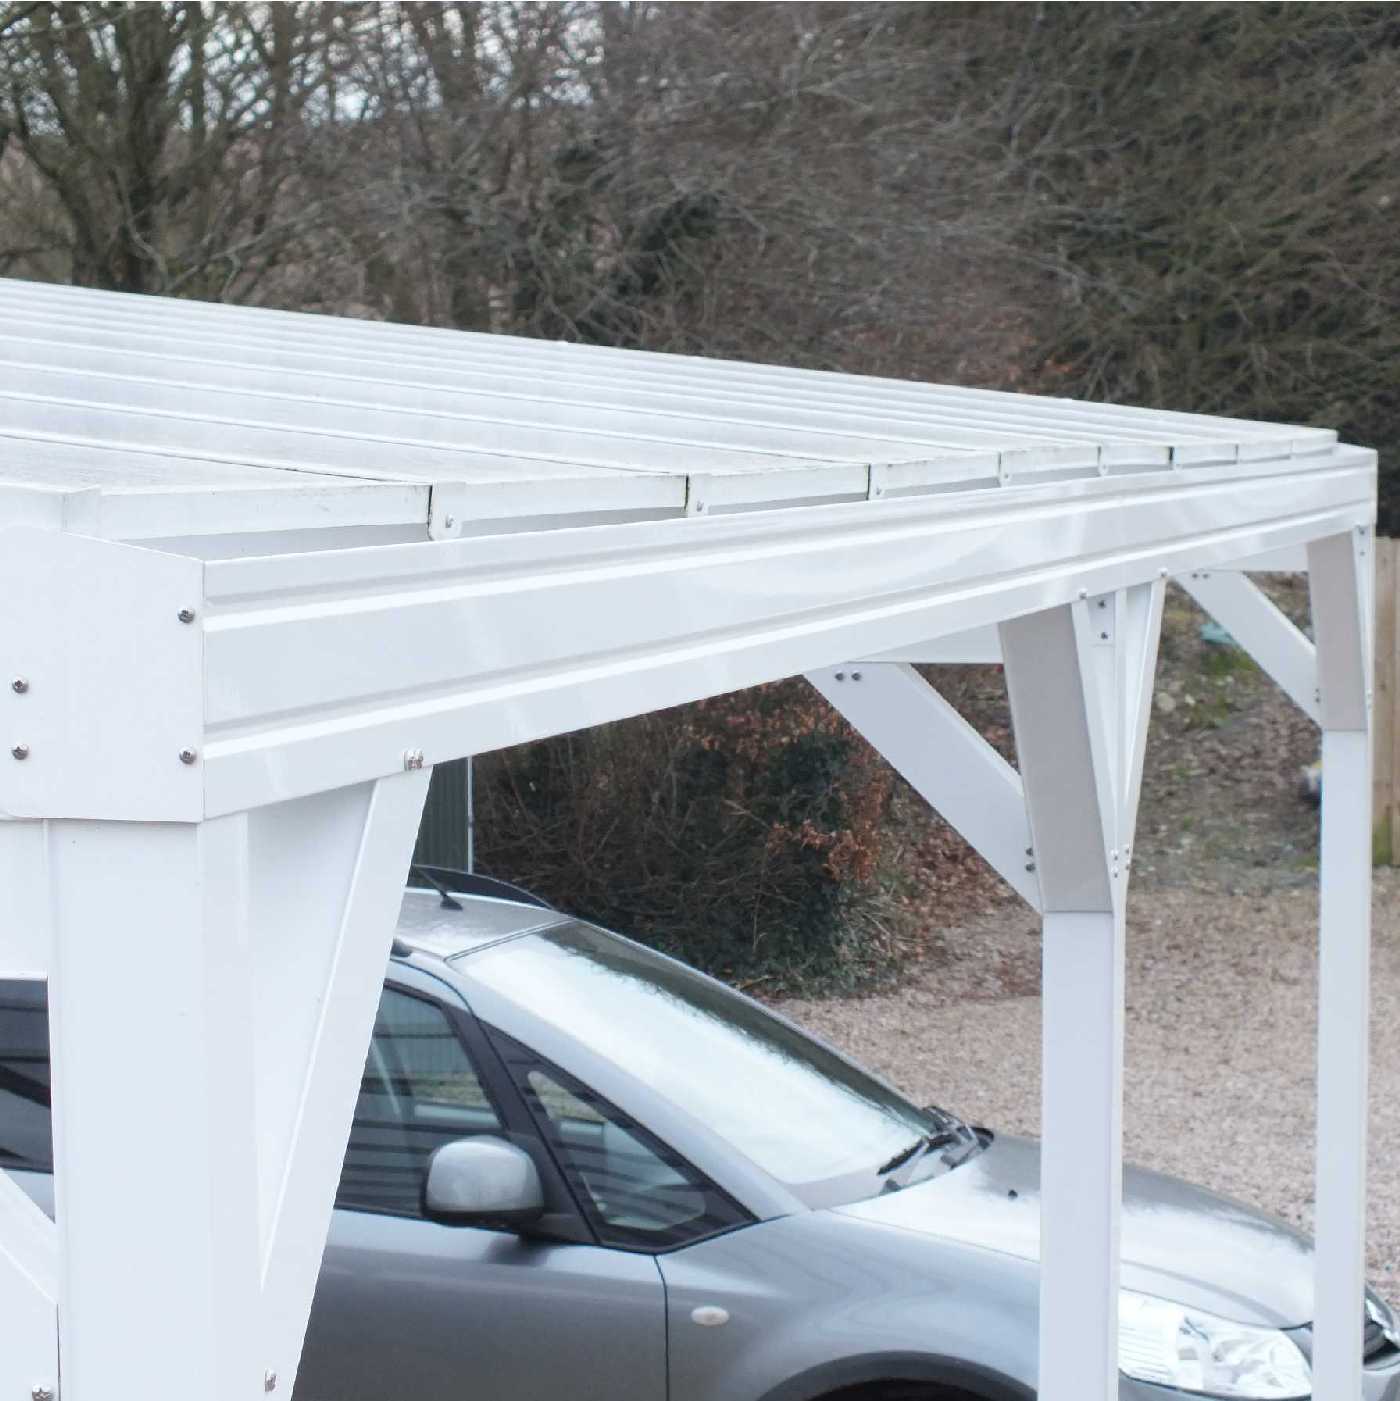 Omega Smart Free-Standing, White MonoPitch Roof Canopy with 16mm Polycarbonate Glazing - 7.8m (W) x 4.0m (P), (8) Supporting Posts from Omega Build